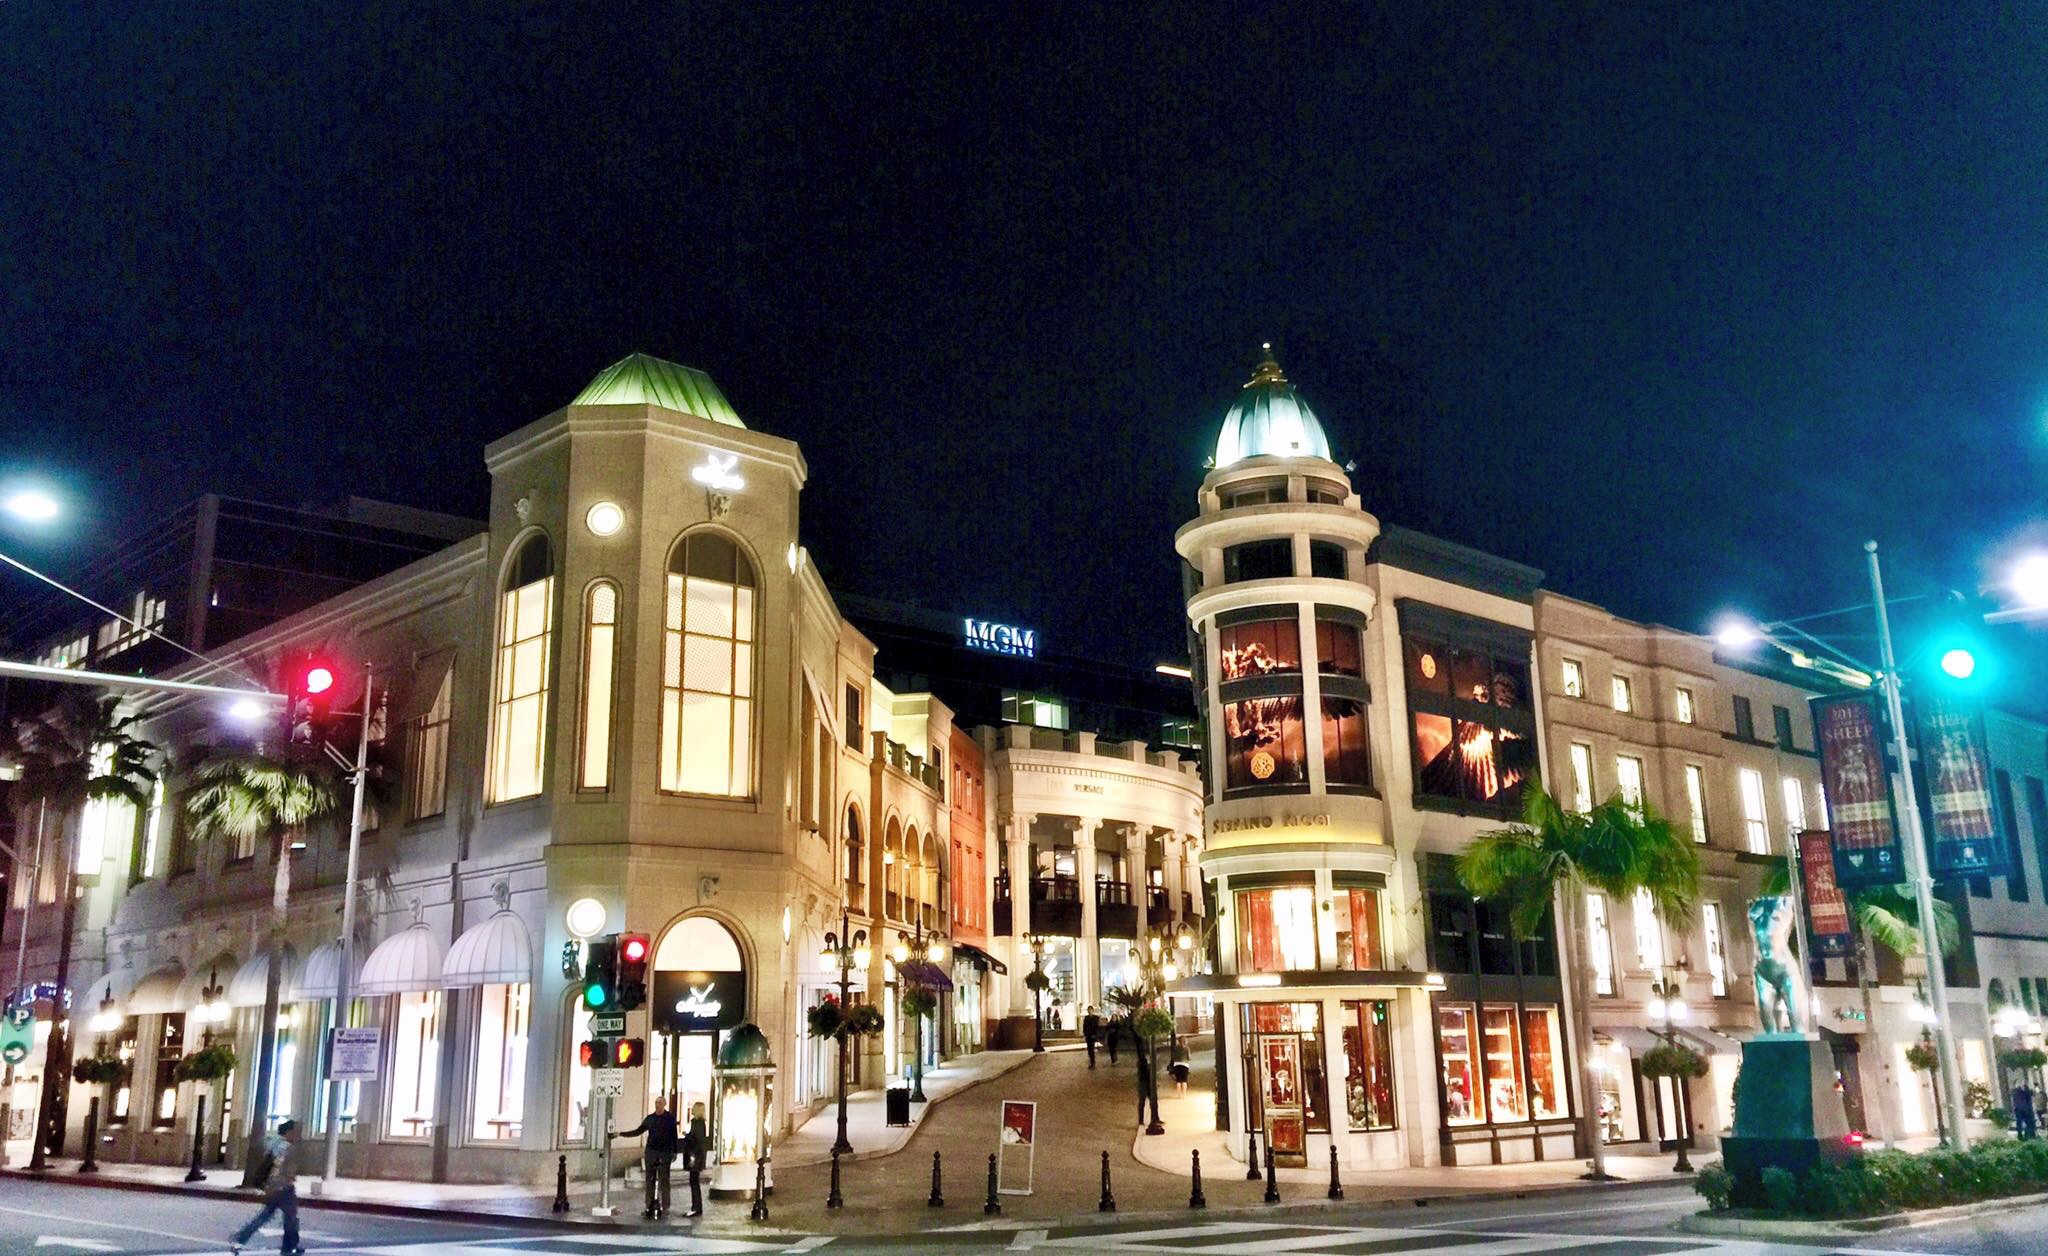 Street at night, Rodeo Drive